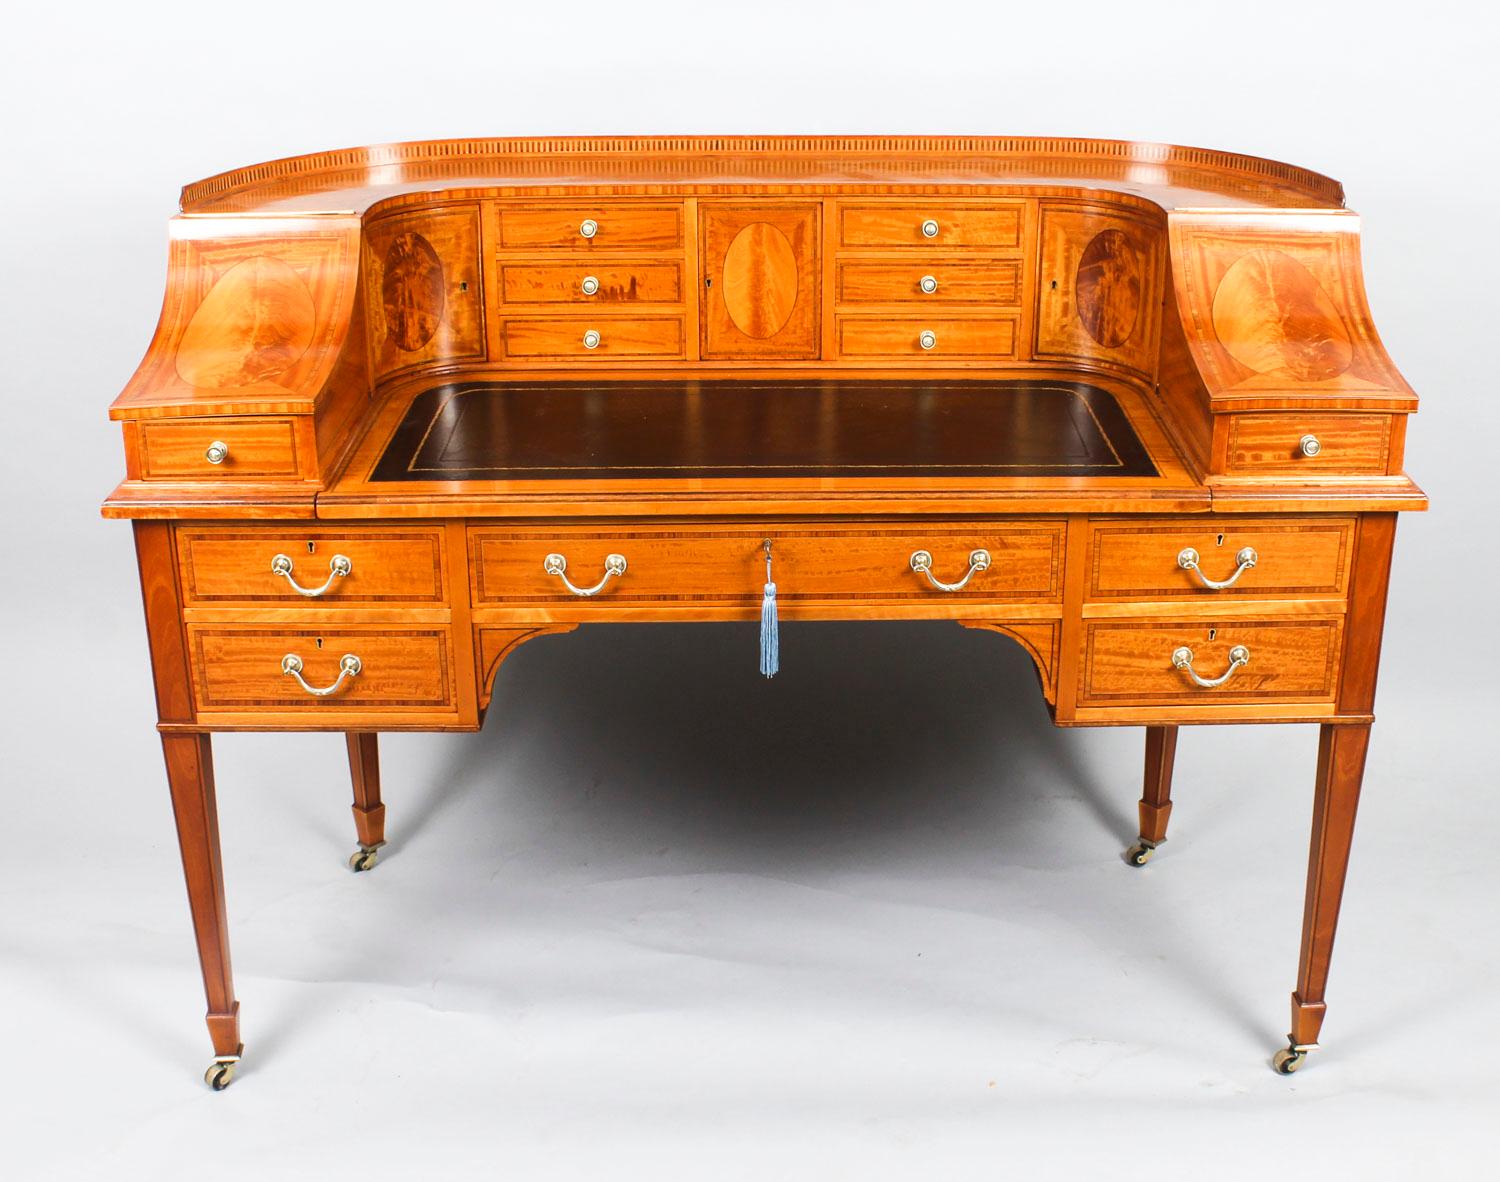 This is a beautiful antique late Victorian satinwood Carlton House desk, by the renowned retailer and manufacturer Maple & Co, circa 1880 in date.

This beautiful desk is made from satinwood, which has been crossbanded in Tulipwood bordered with